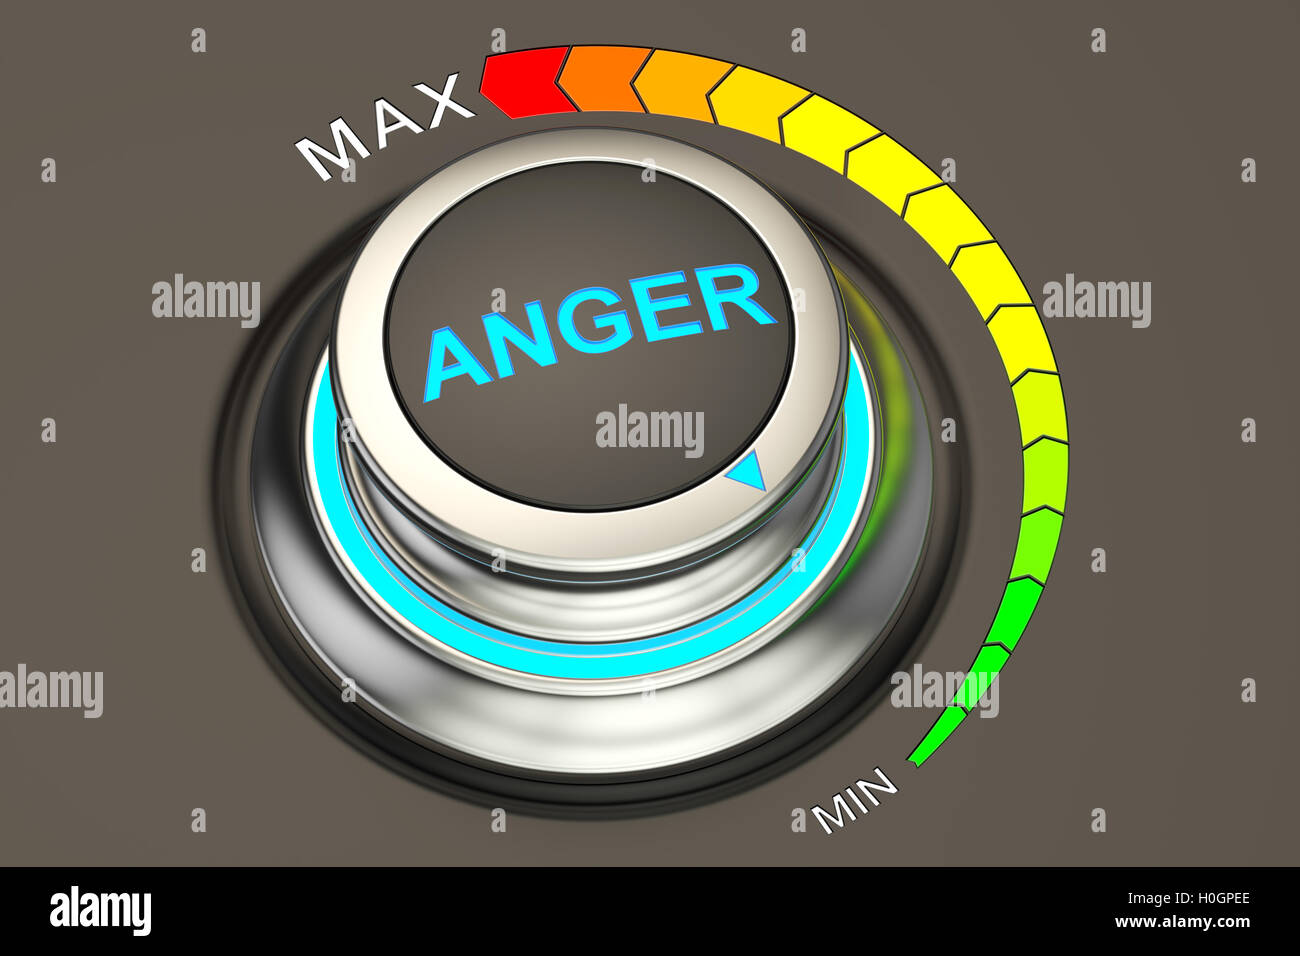 min level of anger concept, 3D rendering Stock Photo